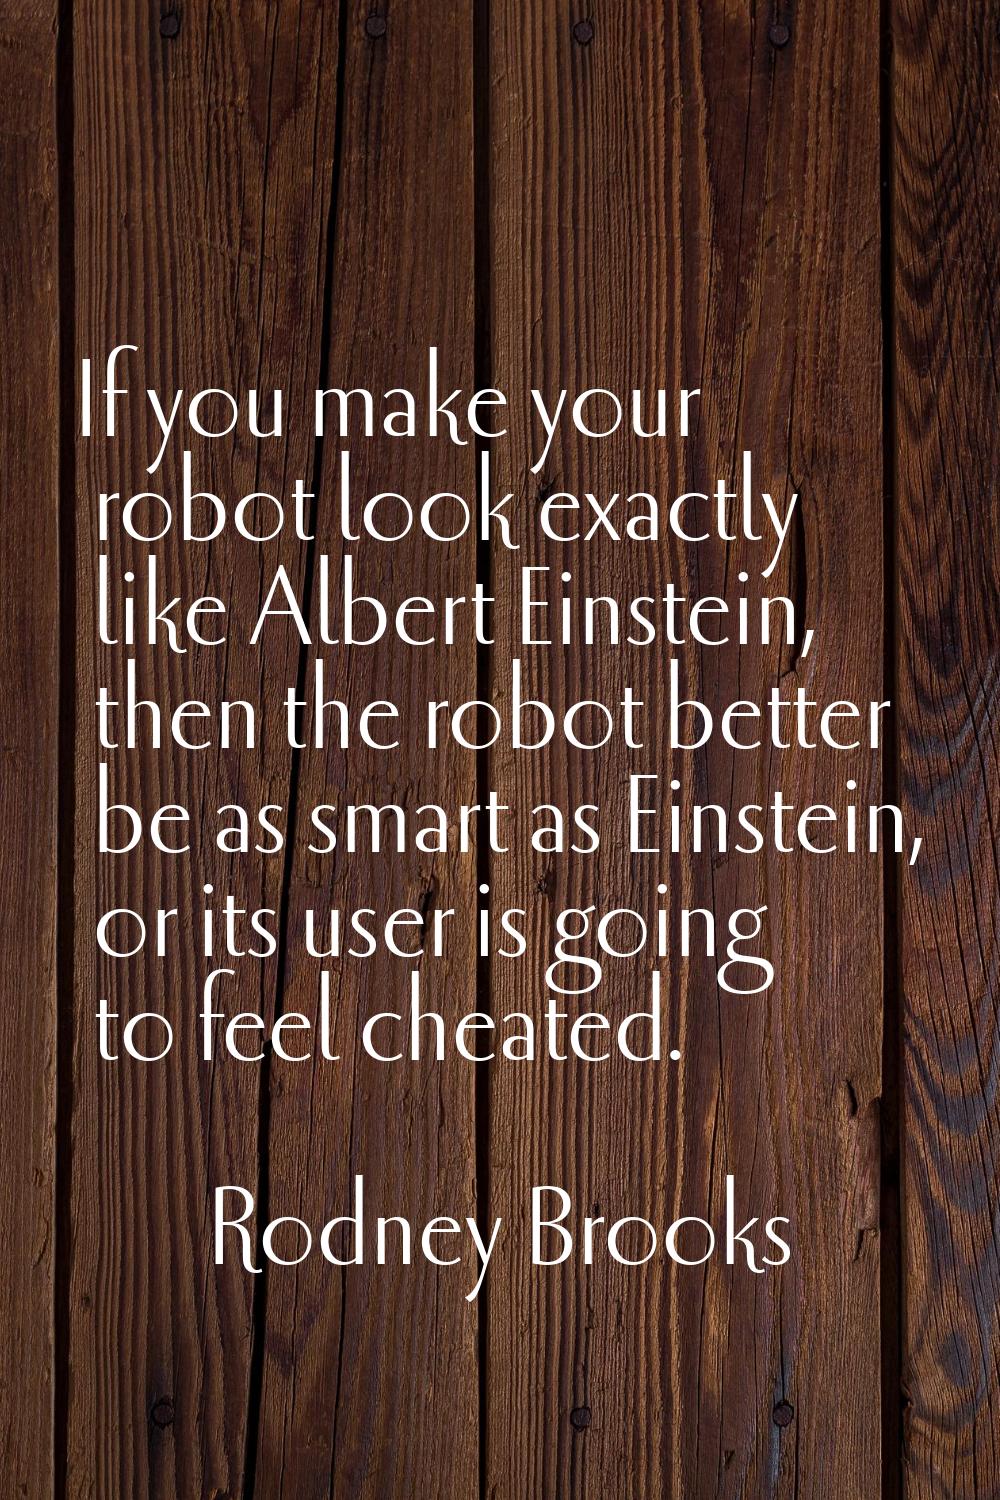 If you make your robot look exactly like Albert Einstein, then the robot better be as smart as Eins